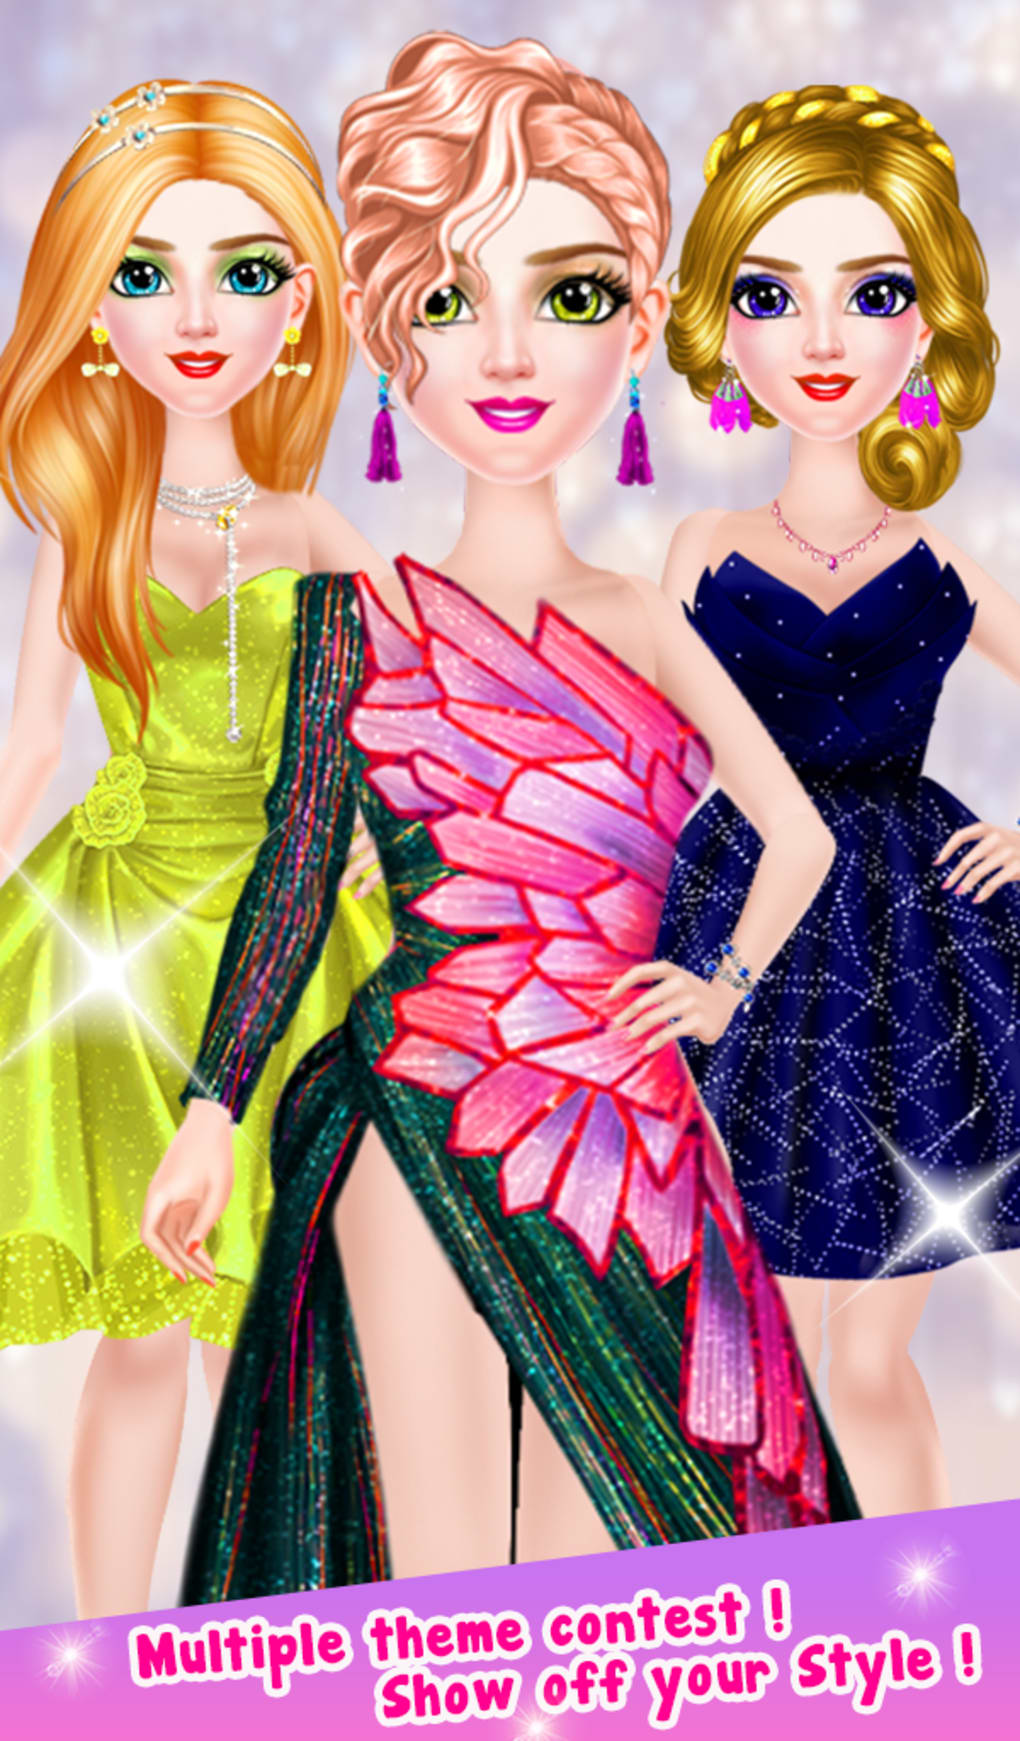 Doll Dress Up Makeup Girl Game - Apps on Google Play